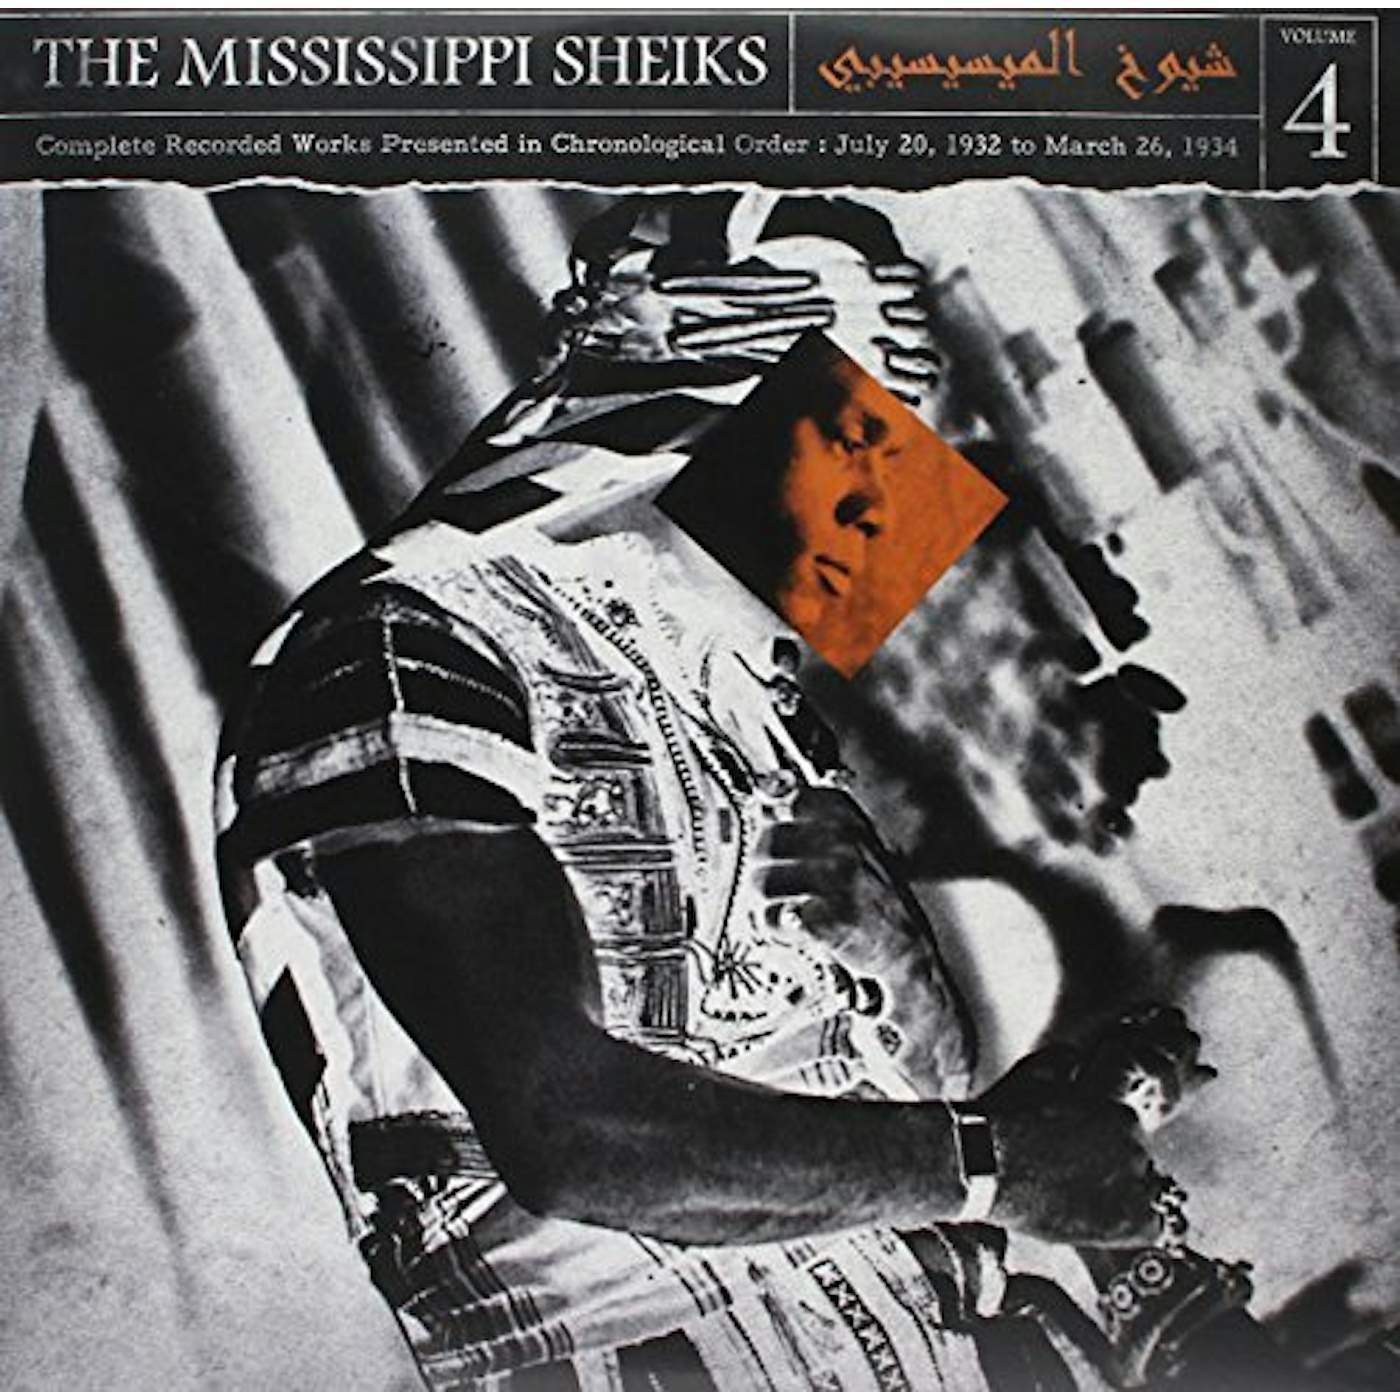 Mississippi Sheiks COMPLETE RECORDED WORKS IN CHRONOLOGICAL ORDER 4 Vinyl Record